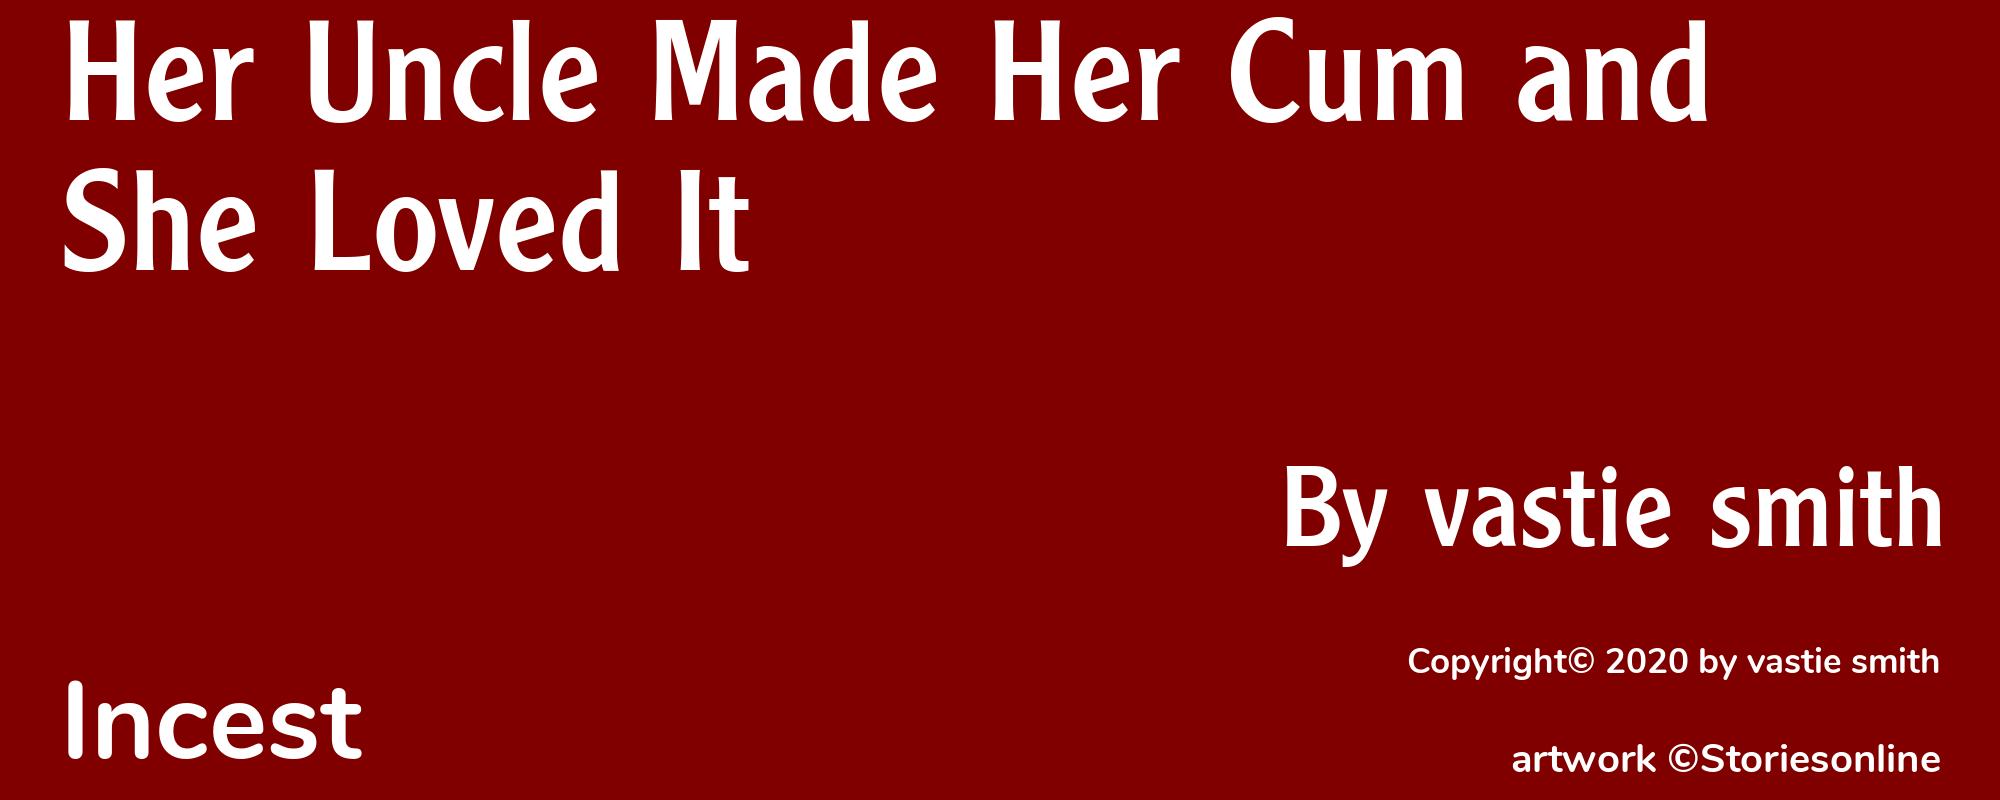 Her Uncle Made Her Cum and She Loved It - Cover